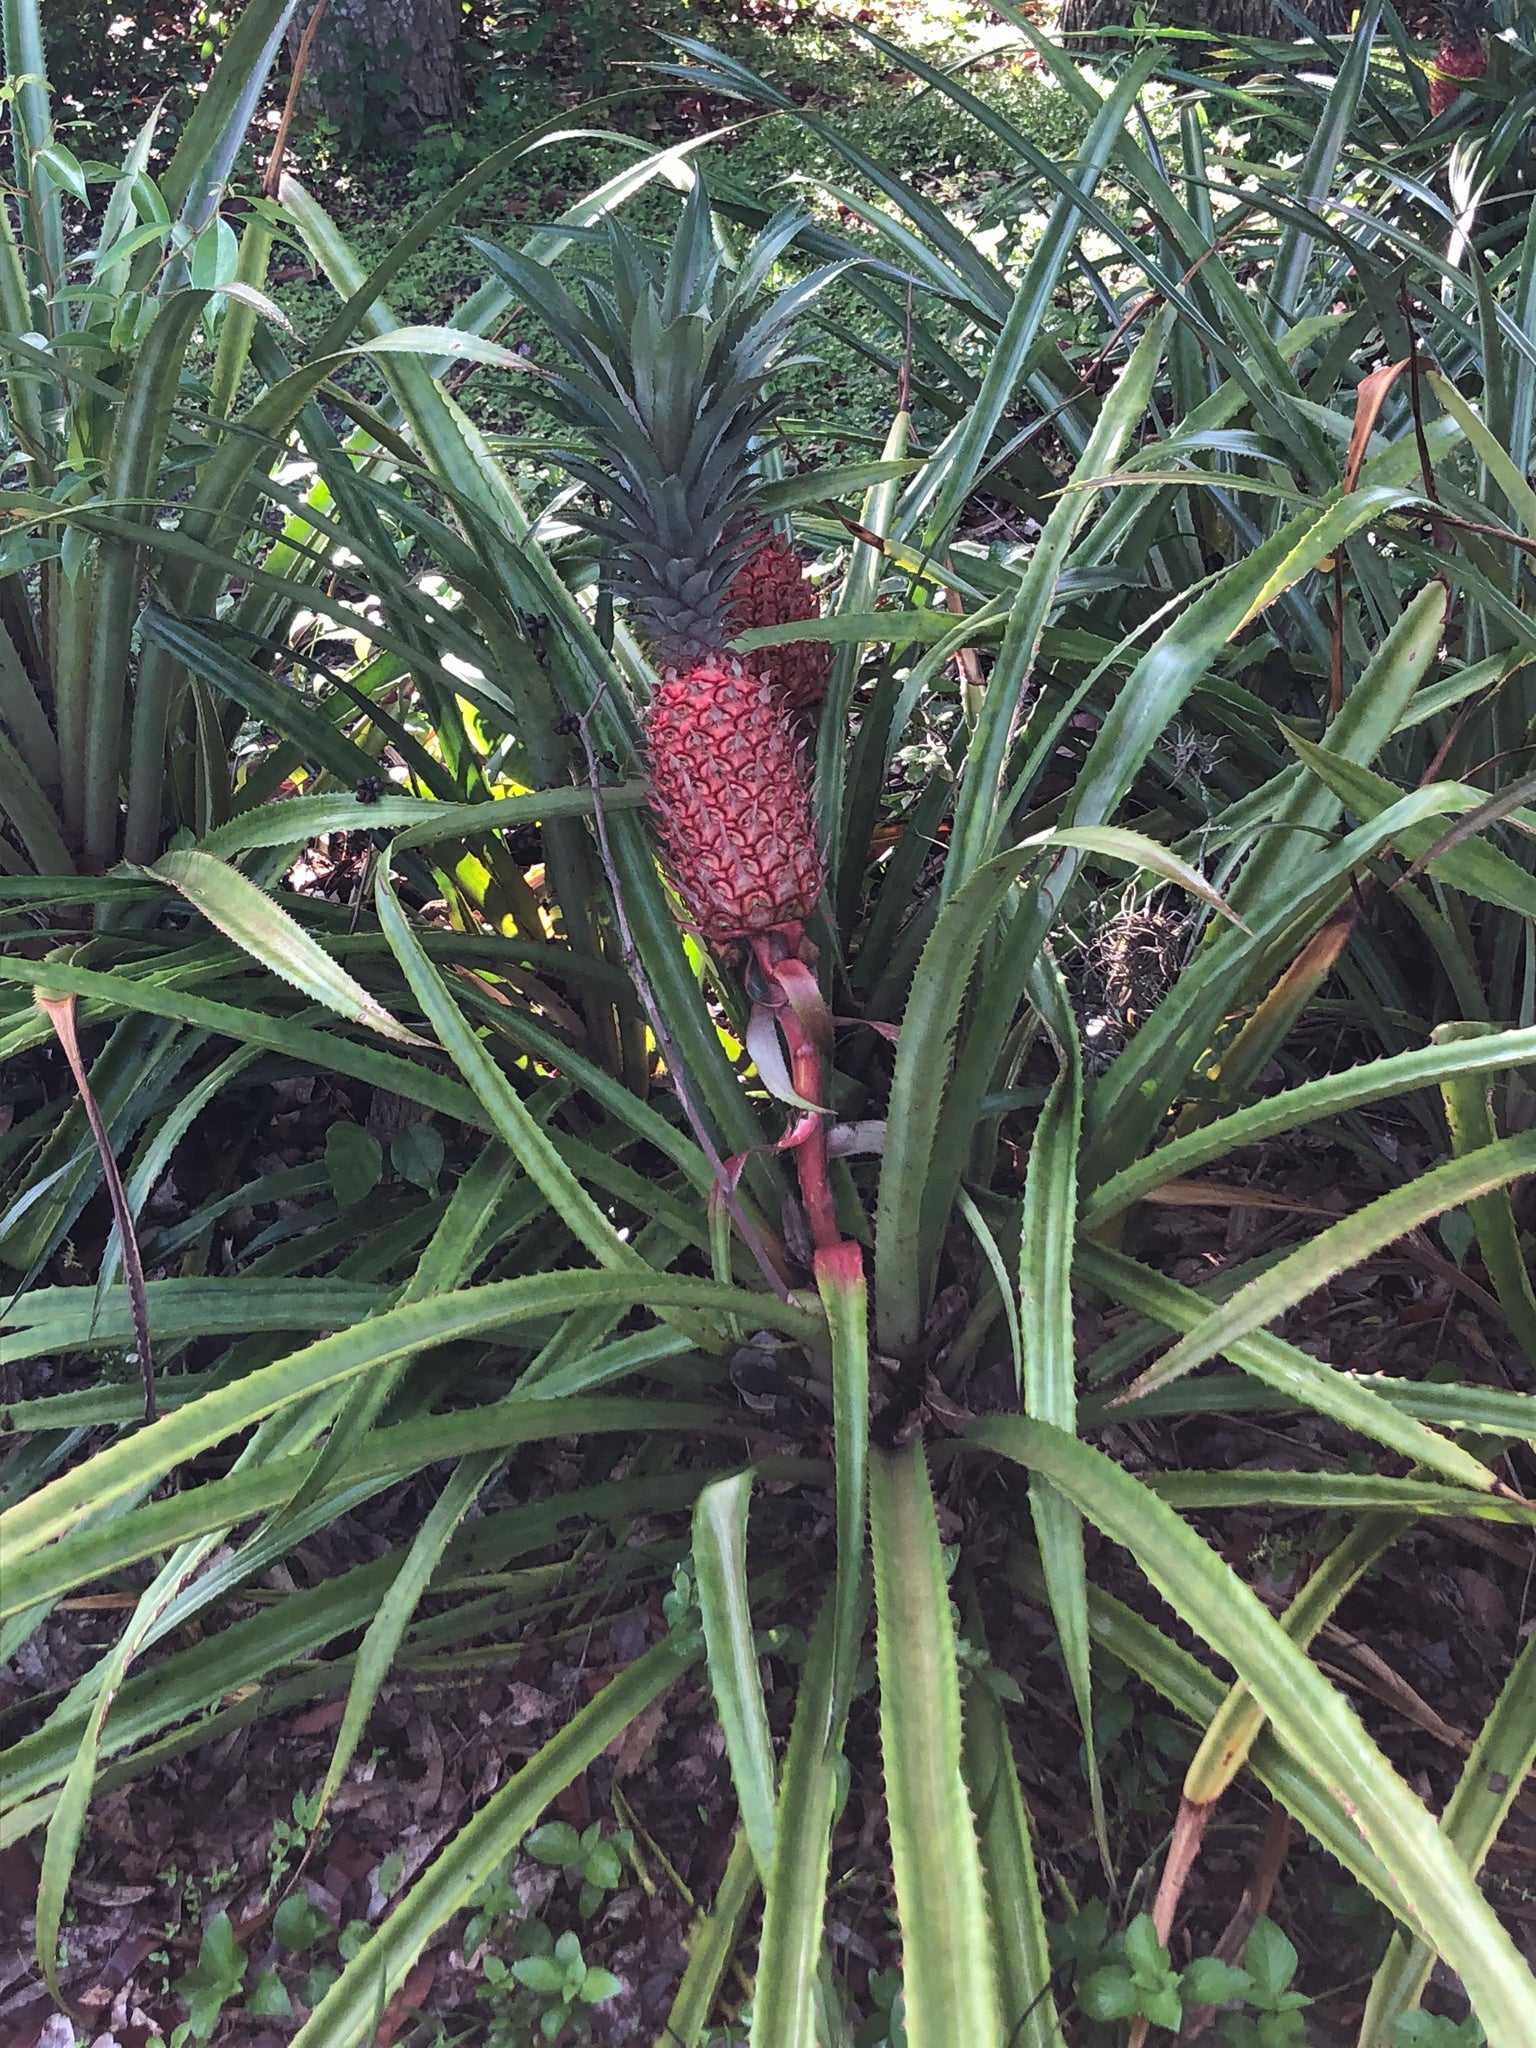 Pineapples near the old settlement area